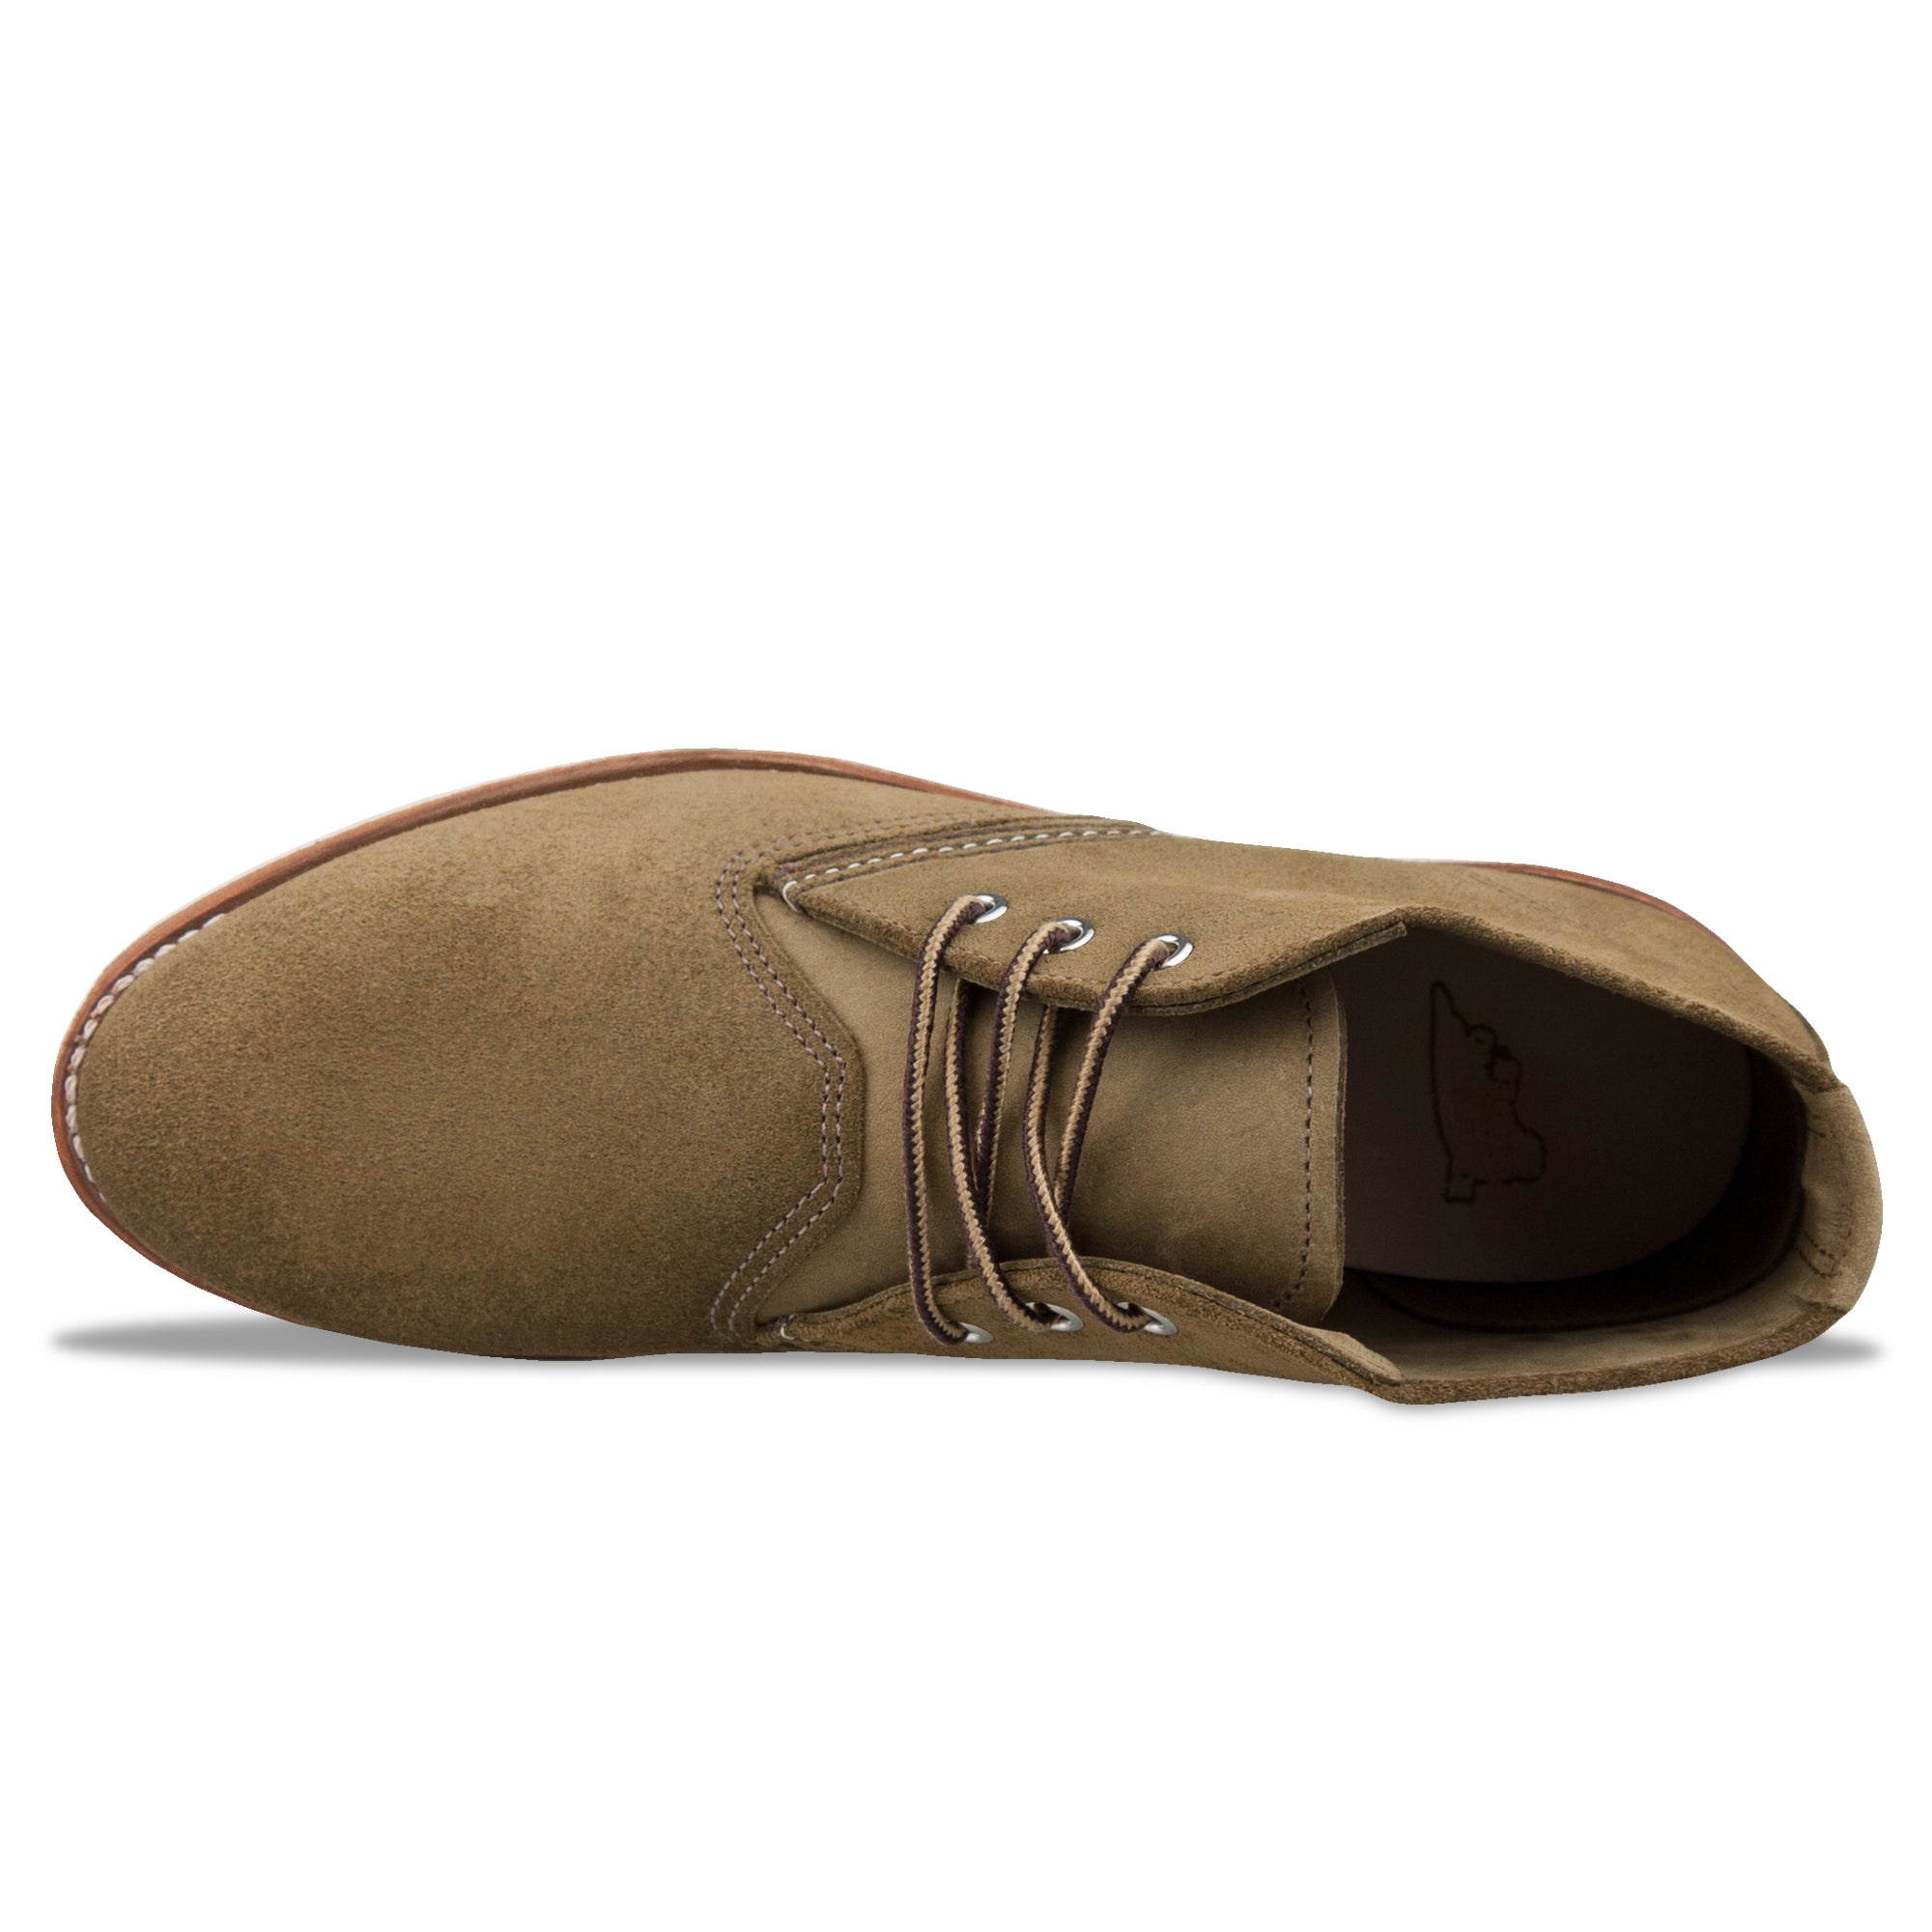 side Diskant enkelt gang Red Wing 3149 Classic Chukka Boot - Olive Mohave Leather